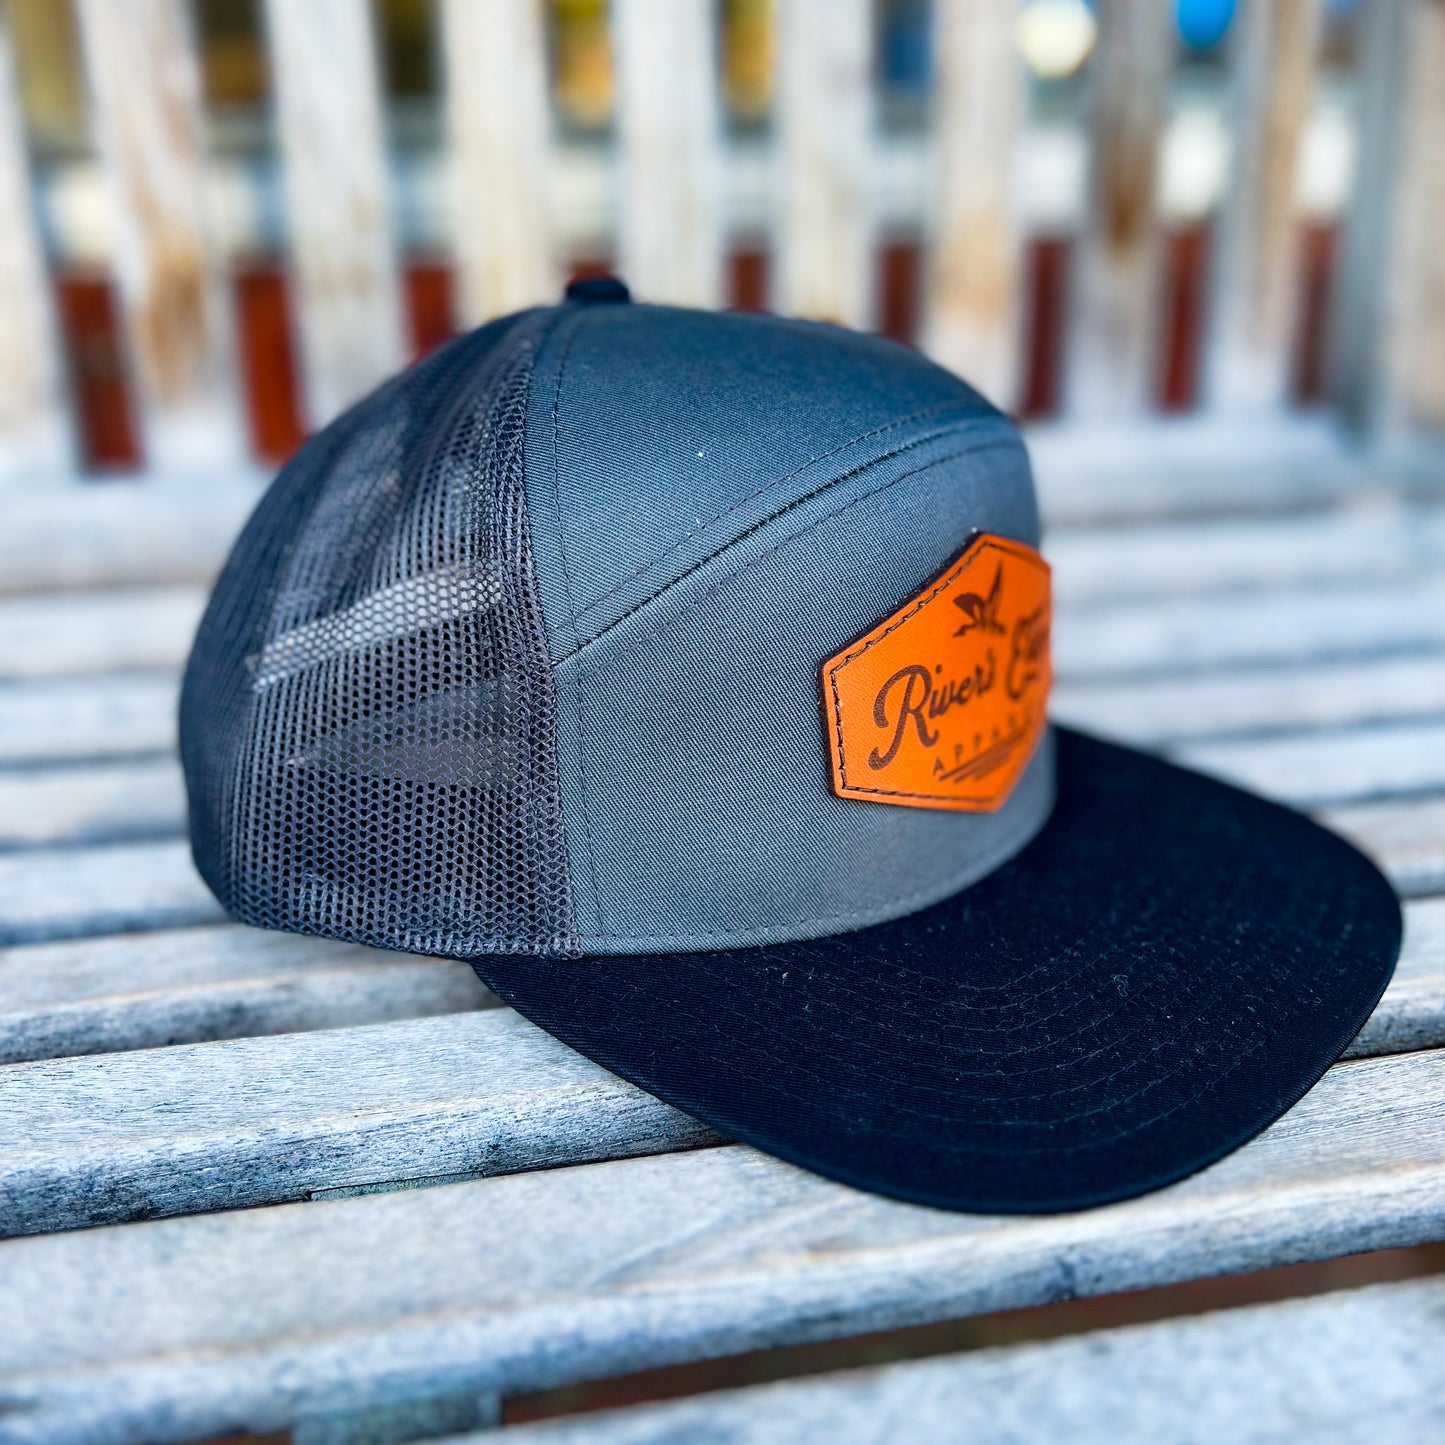 7 Panel River’s Edge Apparel Trucker Hat with Leather Patch - Charcoal/Black